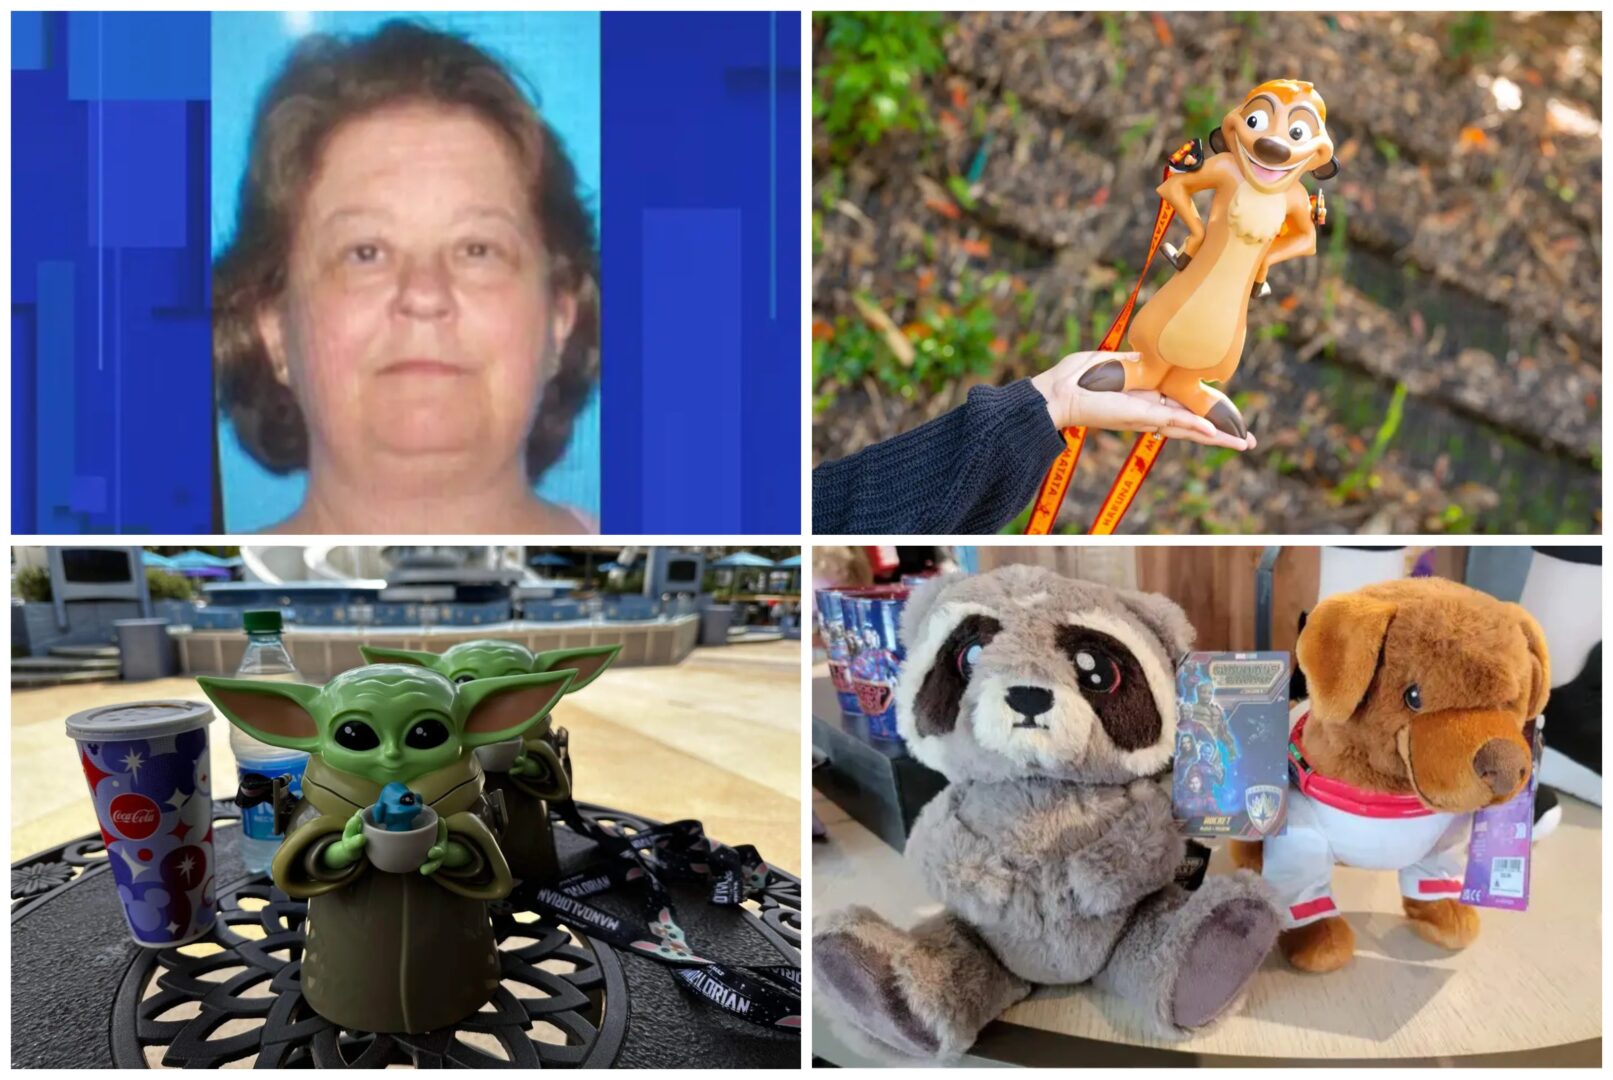 Disney News Highlights: Missing Cast Member Found Deceased, Grogu and Timon Sippers, Silver Anniversary on the Seas DCL, “Dancing” Returns to ABC This Season